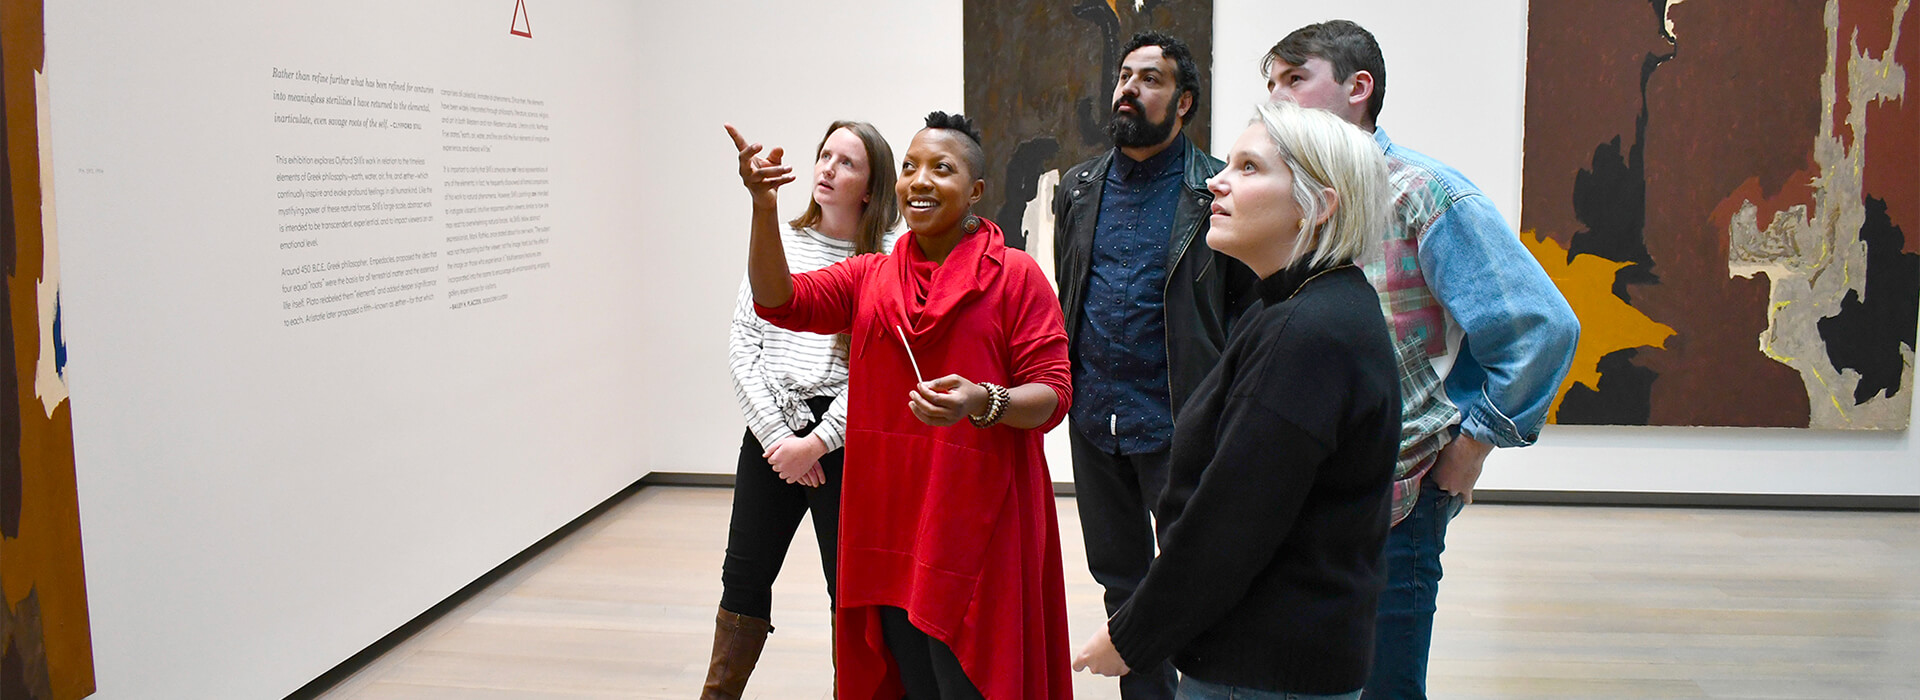 A group tours the Clyfford Still Museum and one participant points up while the others look at where she is pointing